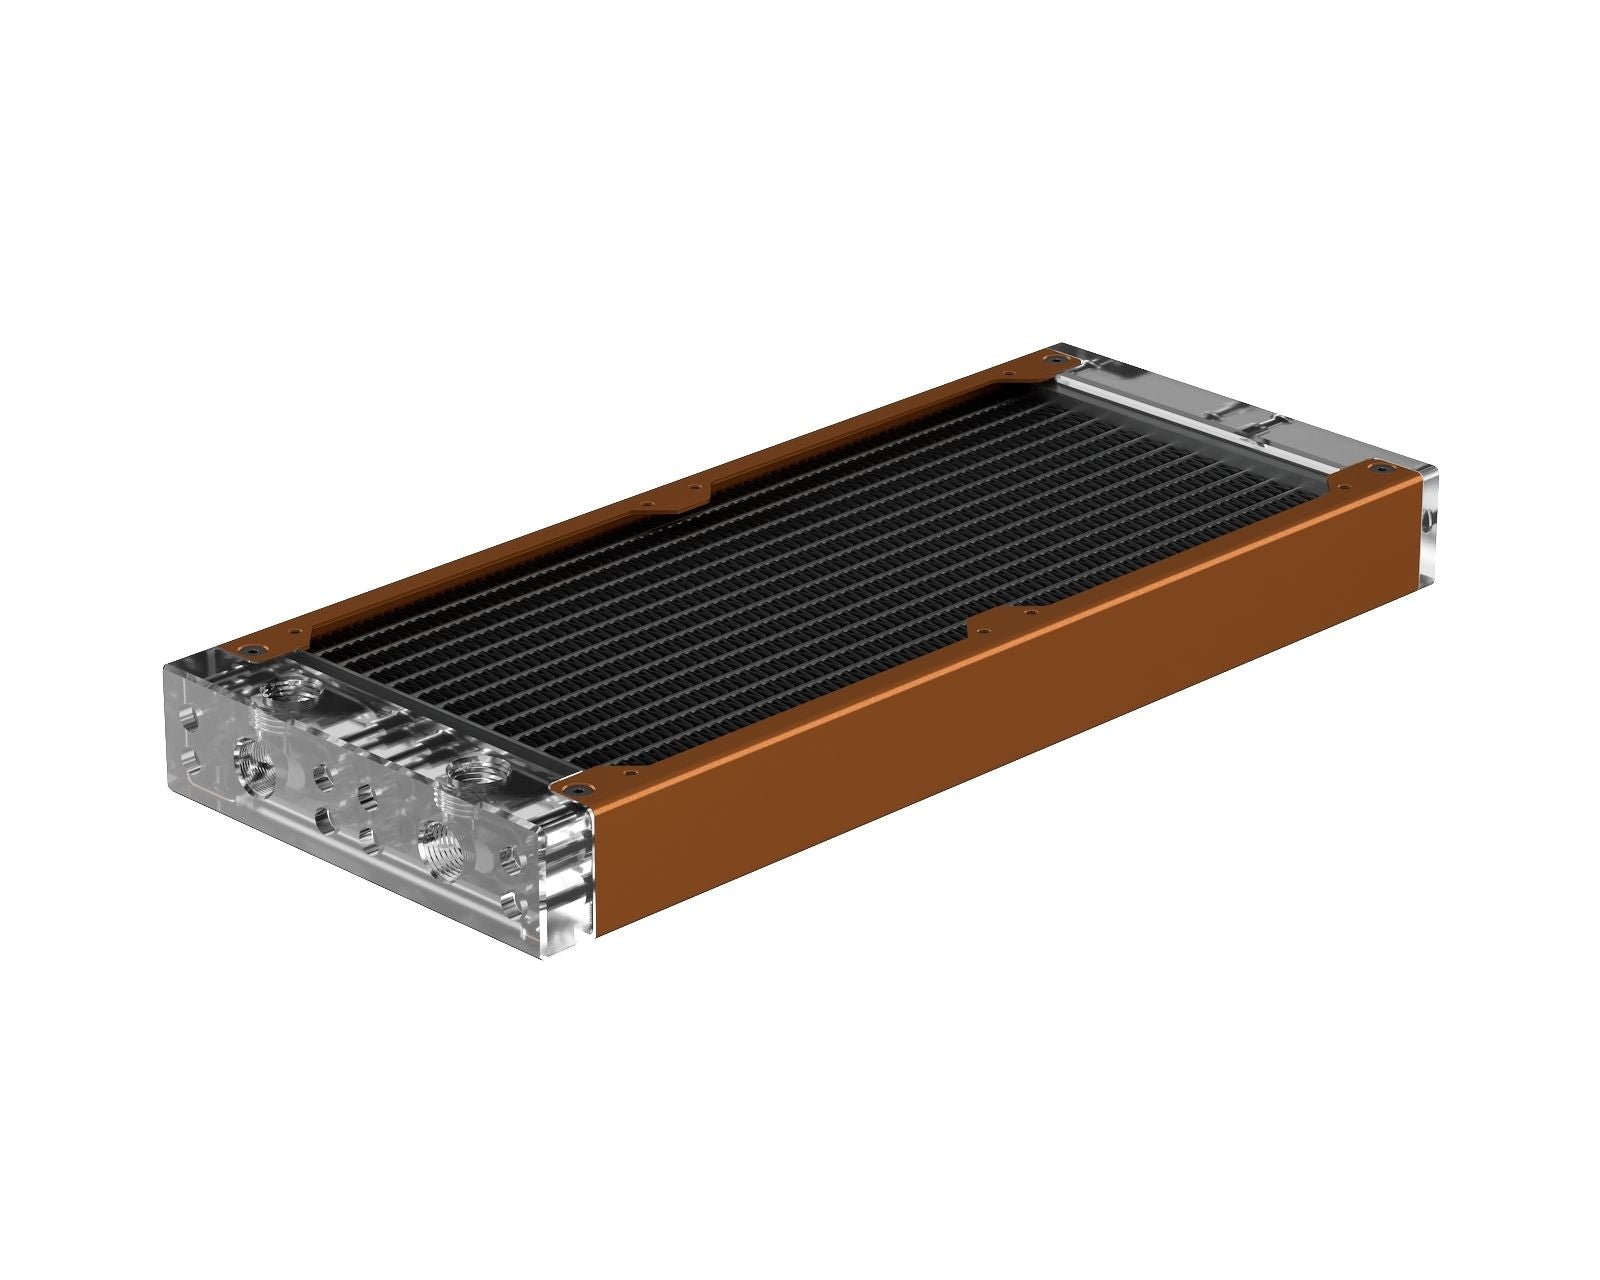 PrimoChill 240SL (30mm) EXIMO Modular Radiator, Clear Acrylic, 2x120mm, Dual Fan (R-SL-A24) Available in 20+ Colors, Assembled in USA and Custom Watercooling Loop Ready - Copper